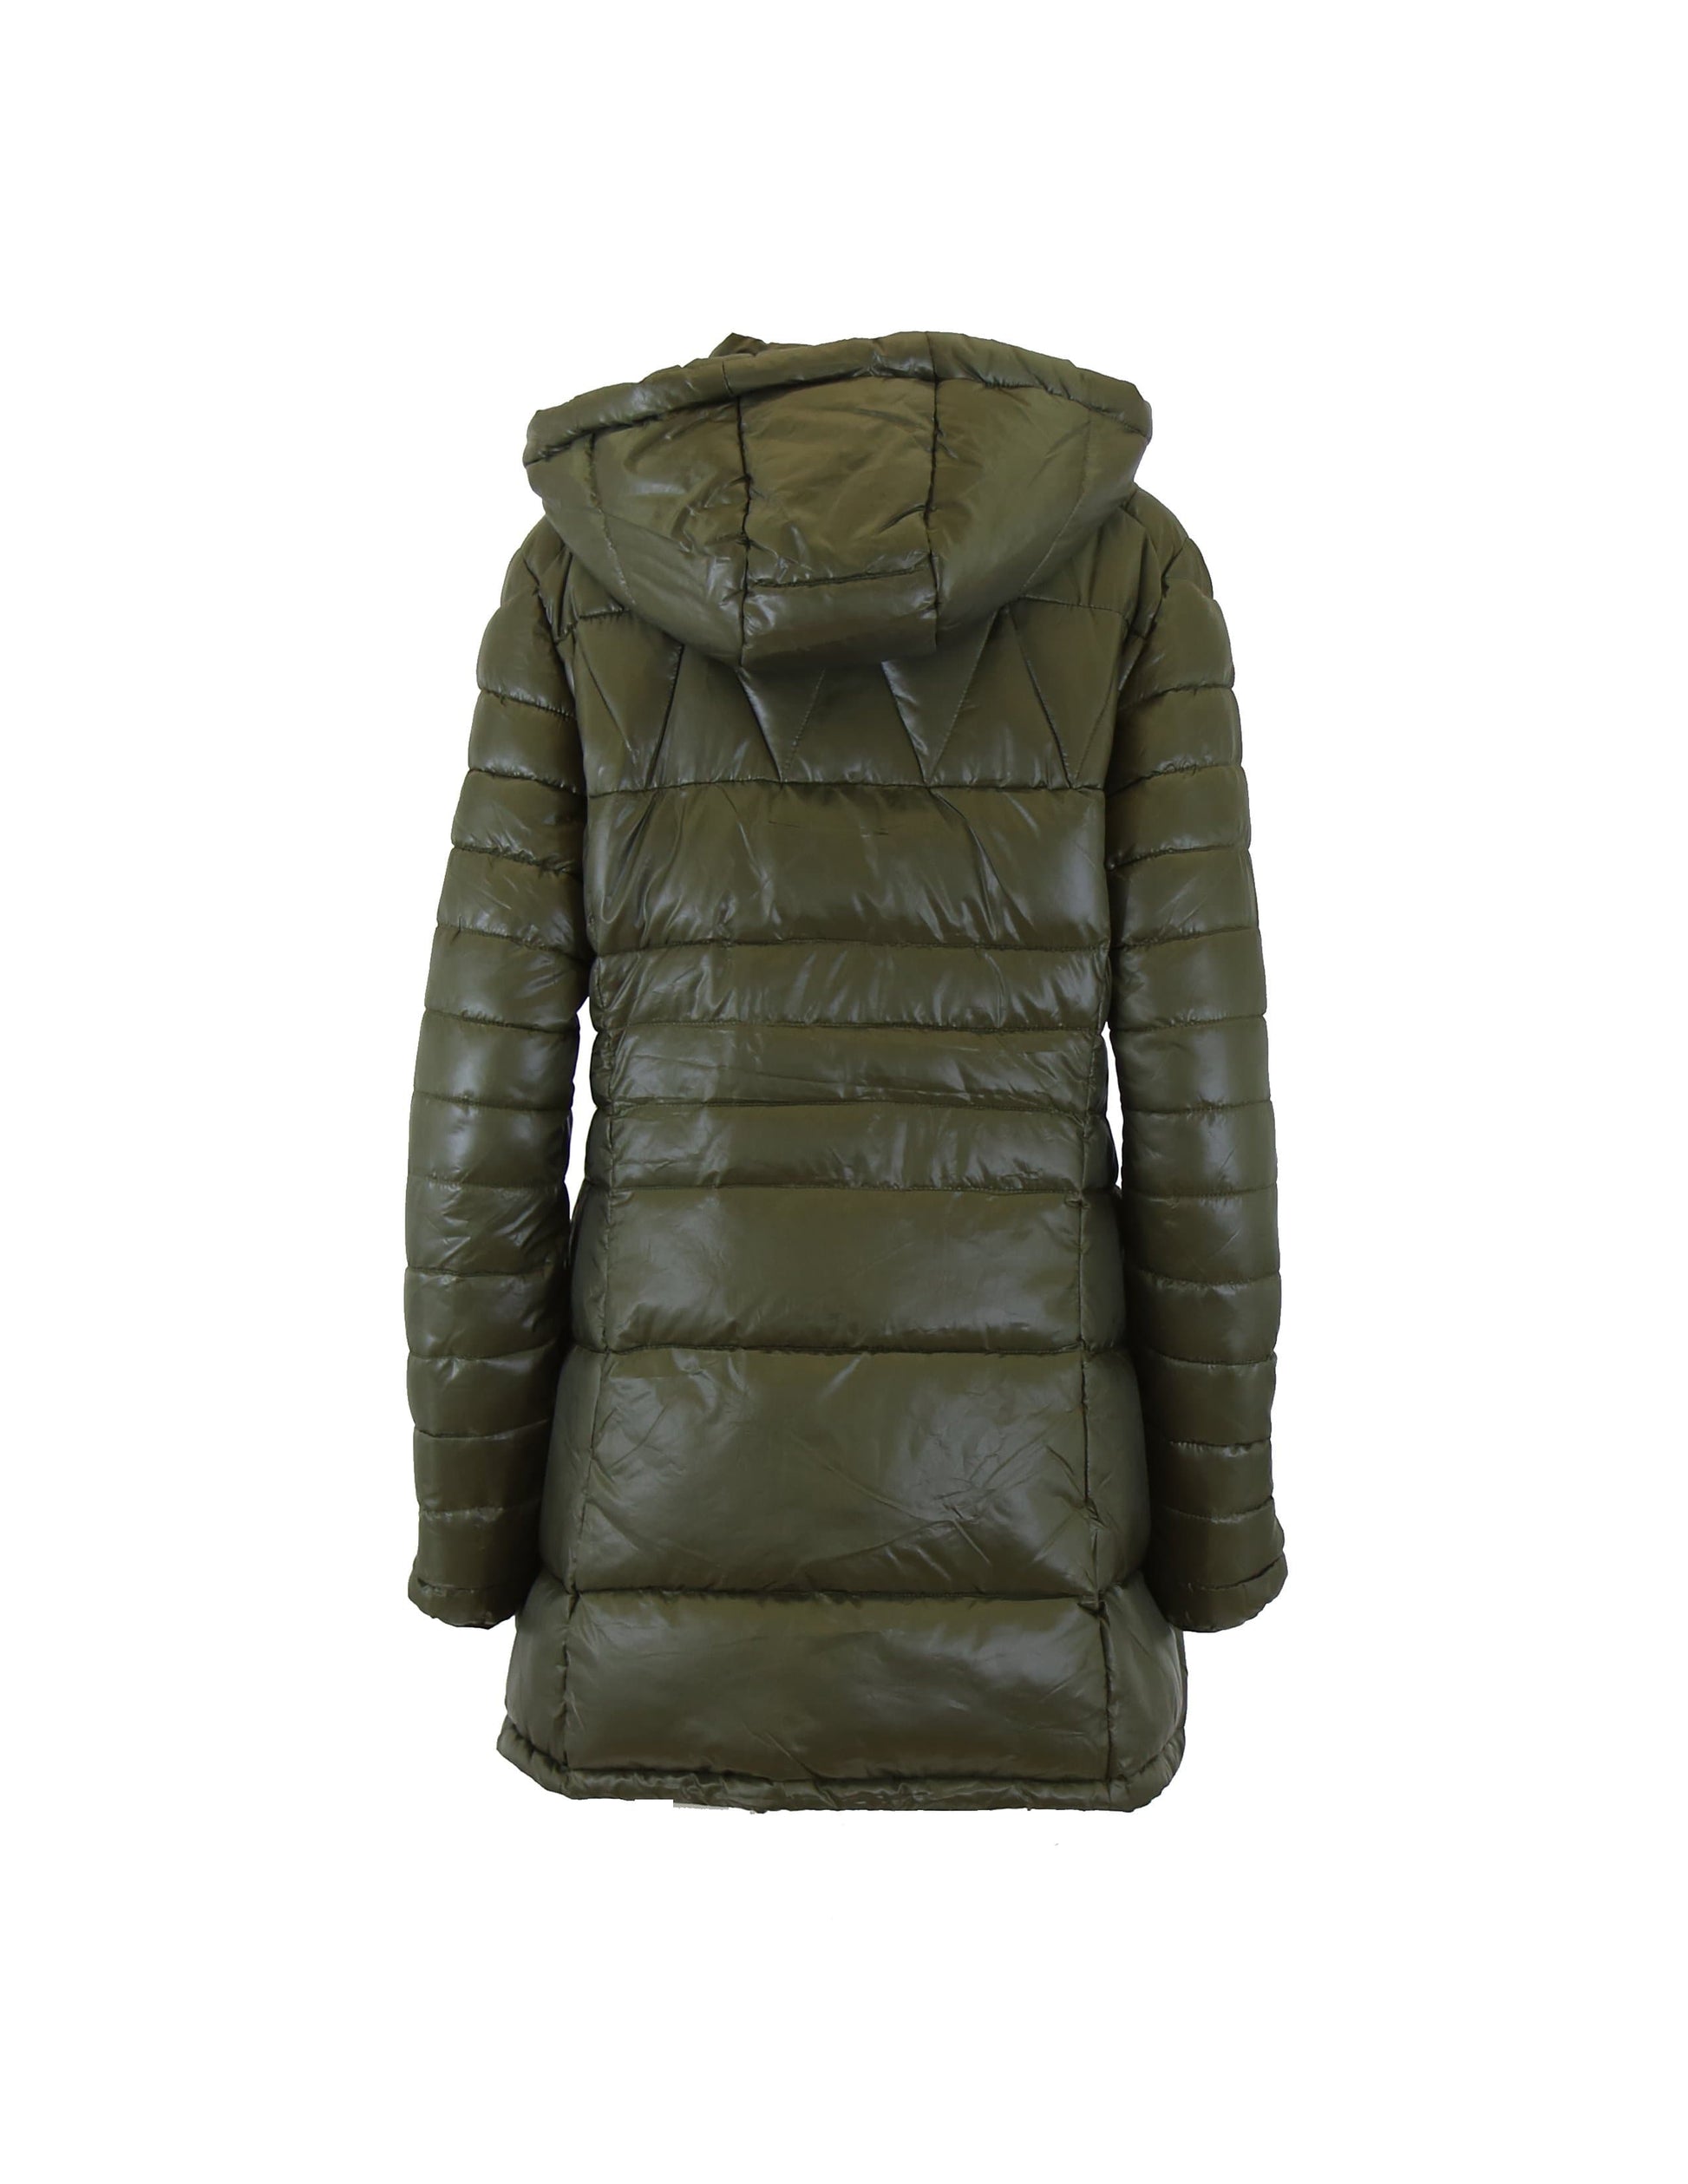 Women's Silhouette-Style Puffer Jackets - GalaxybyHarvic